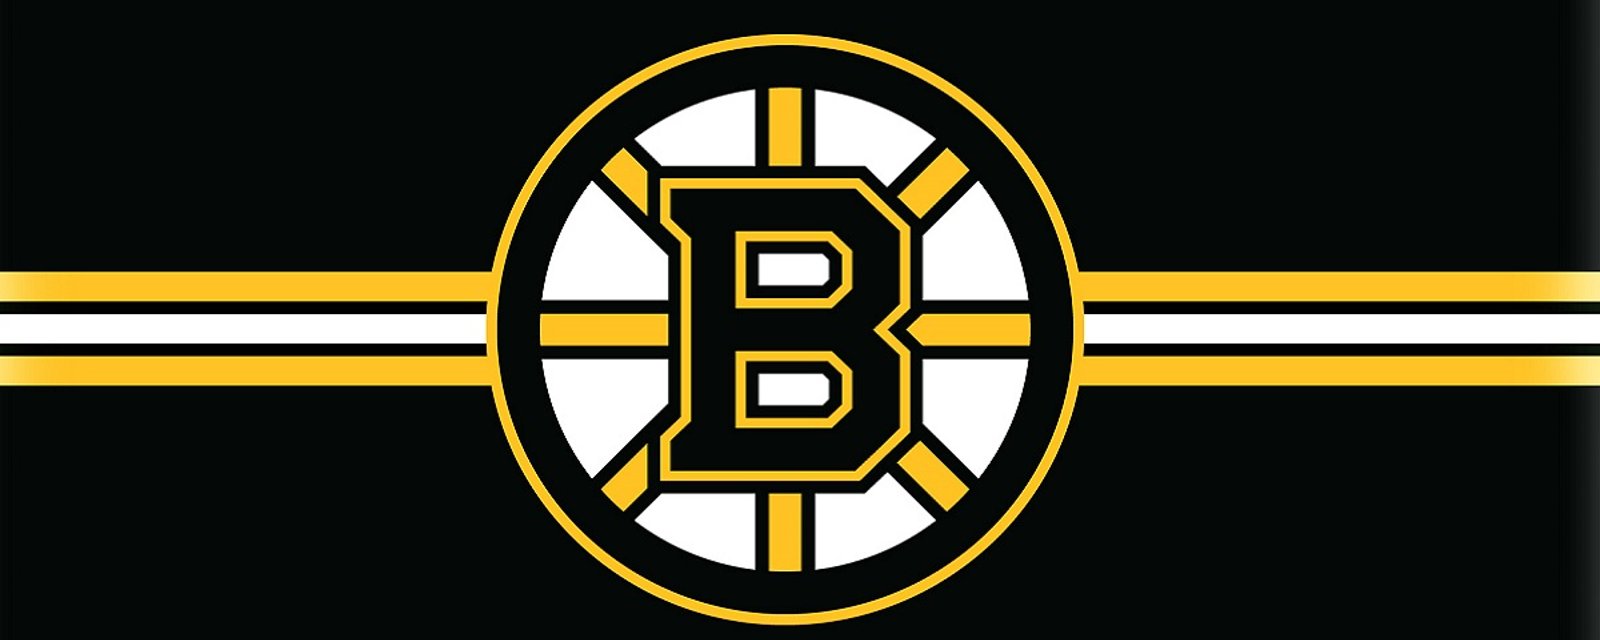 Breaking: Bruins defenseman out “indefinitely” with an injury.